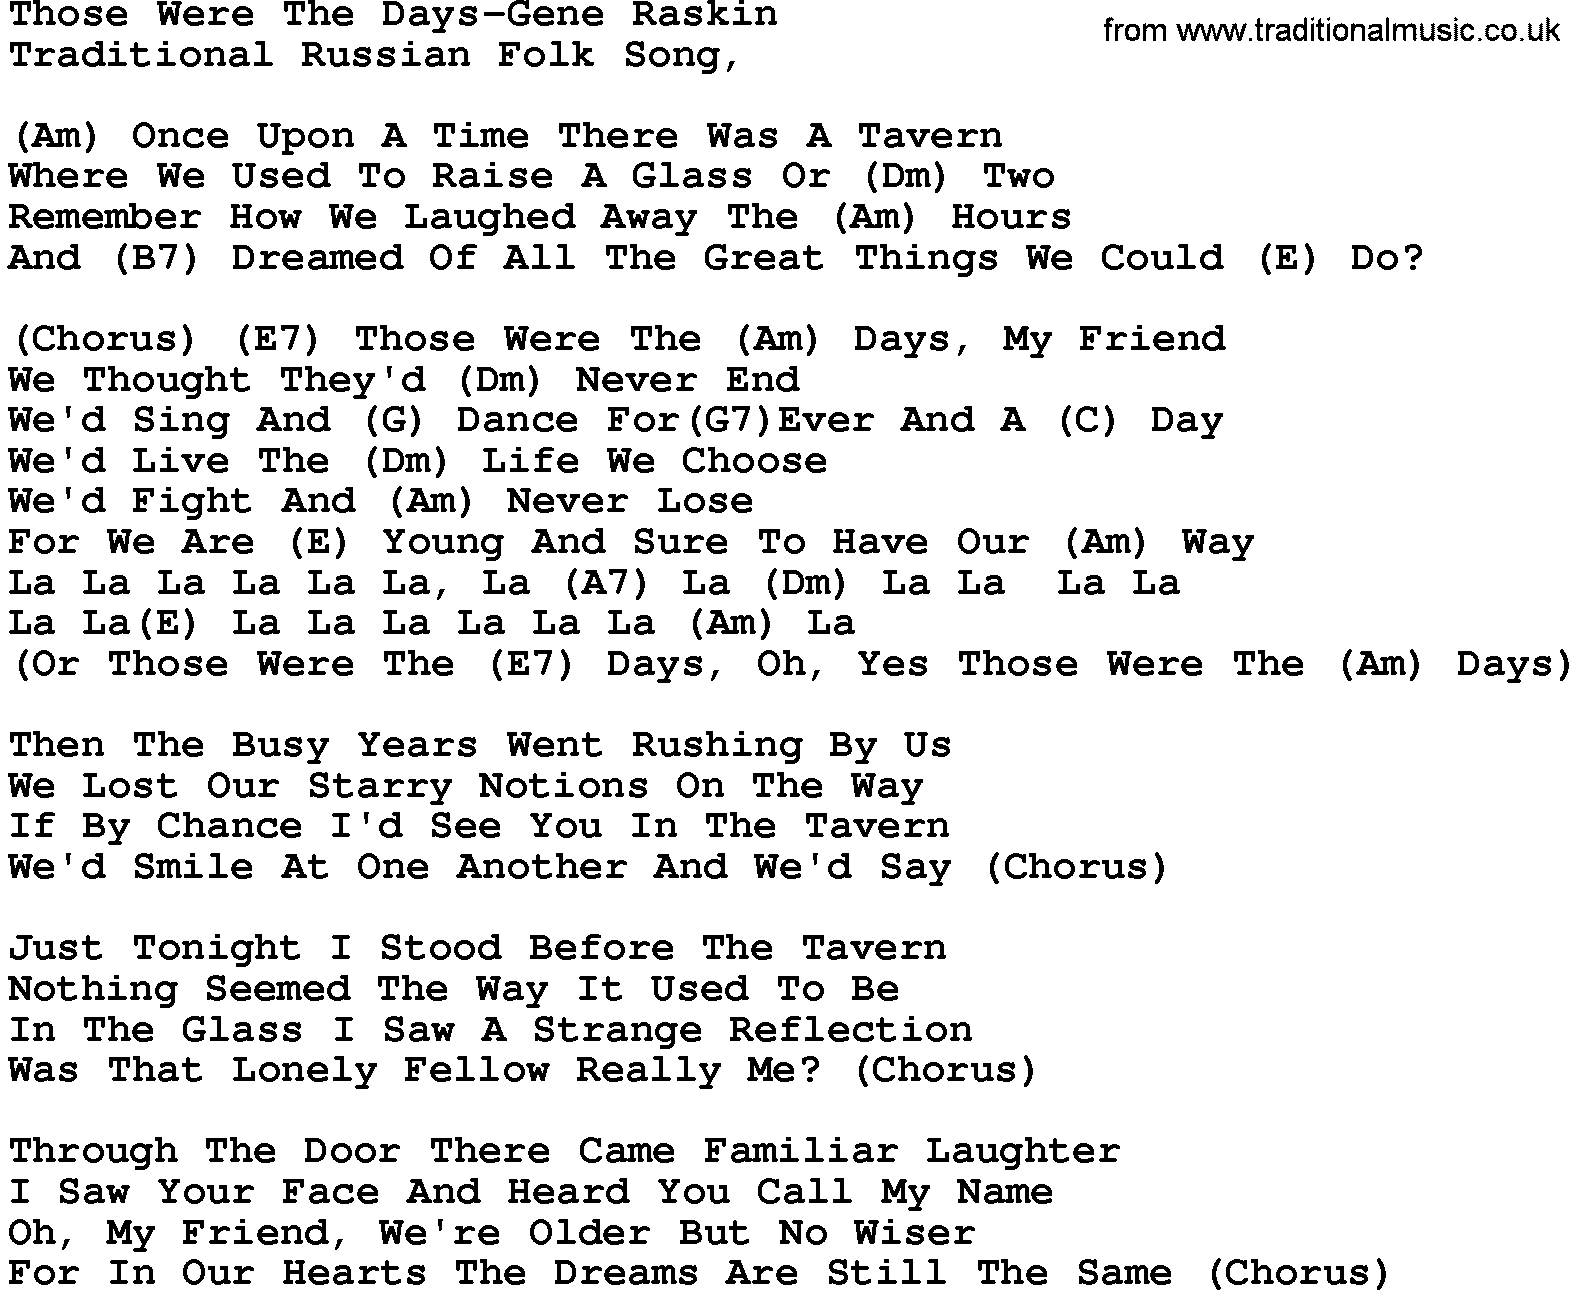 Country music song: Those Were The Days-Gene Raskin lyrics and chords